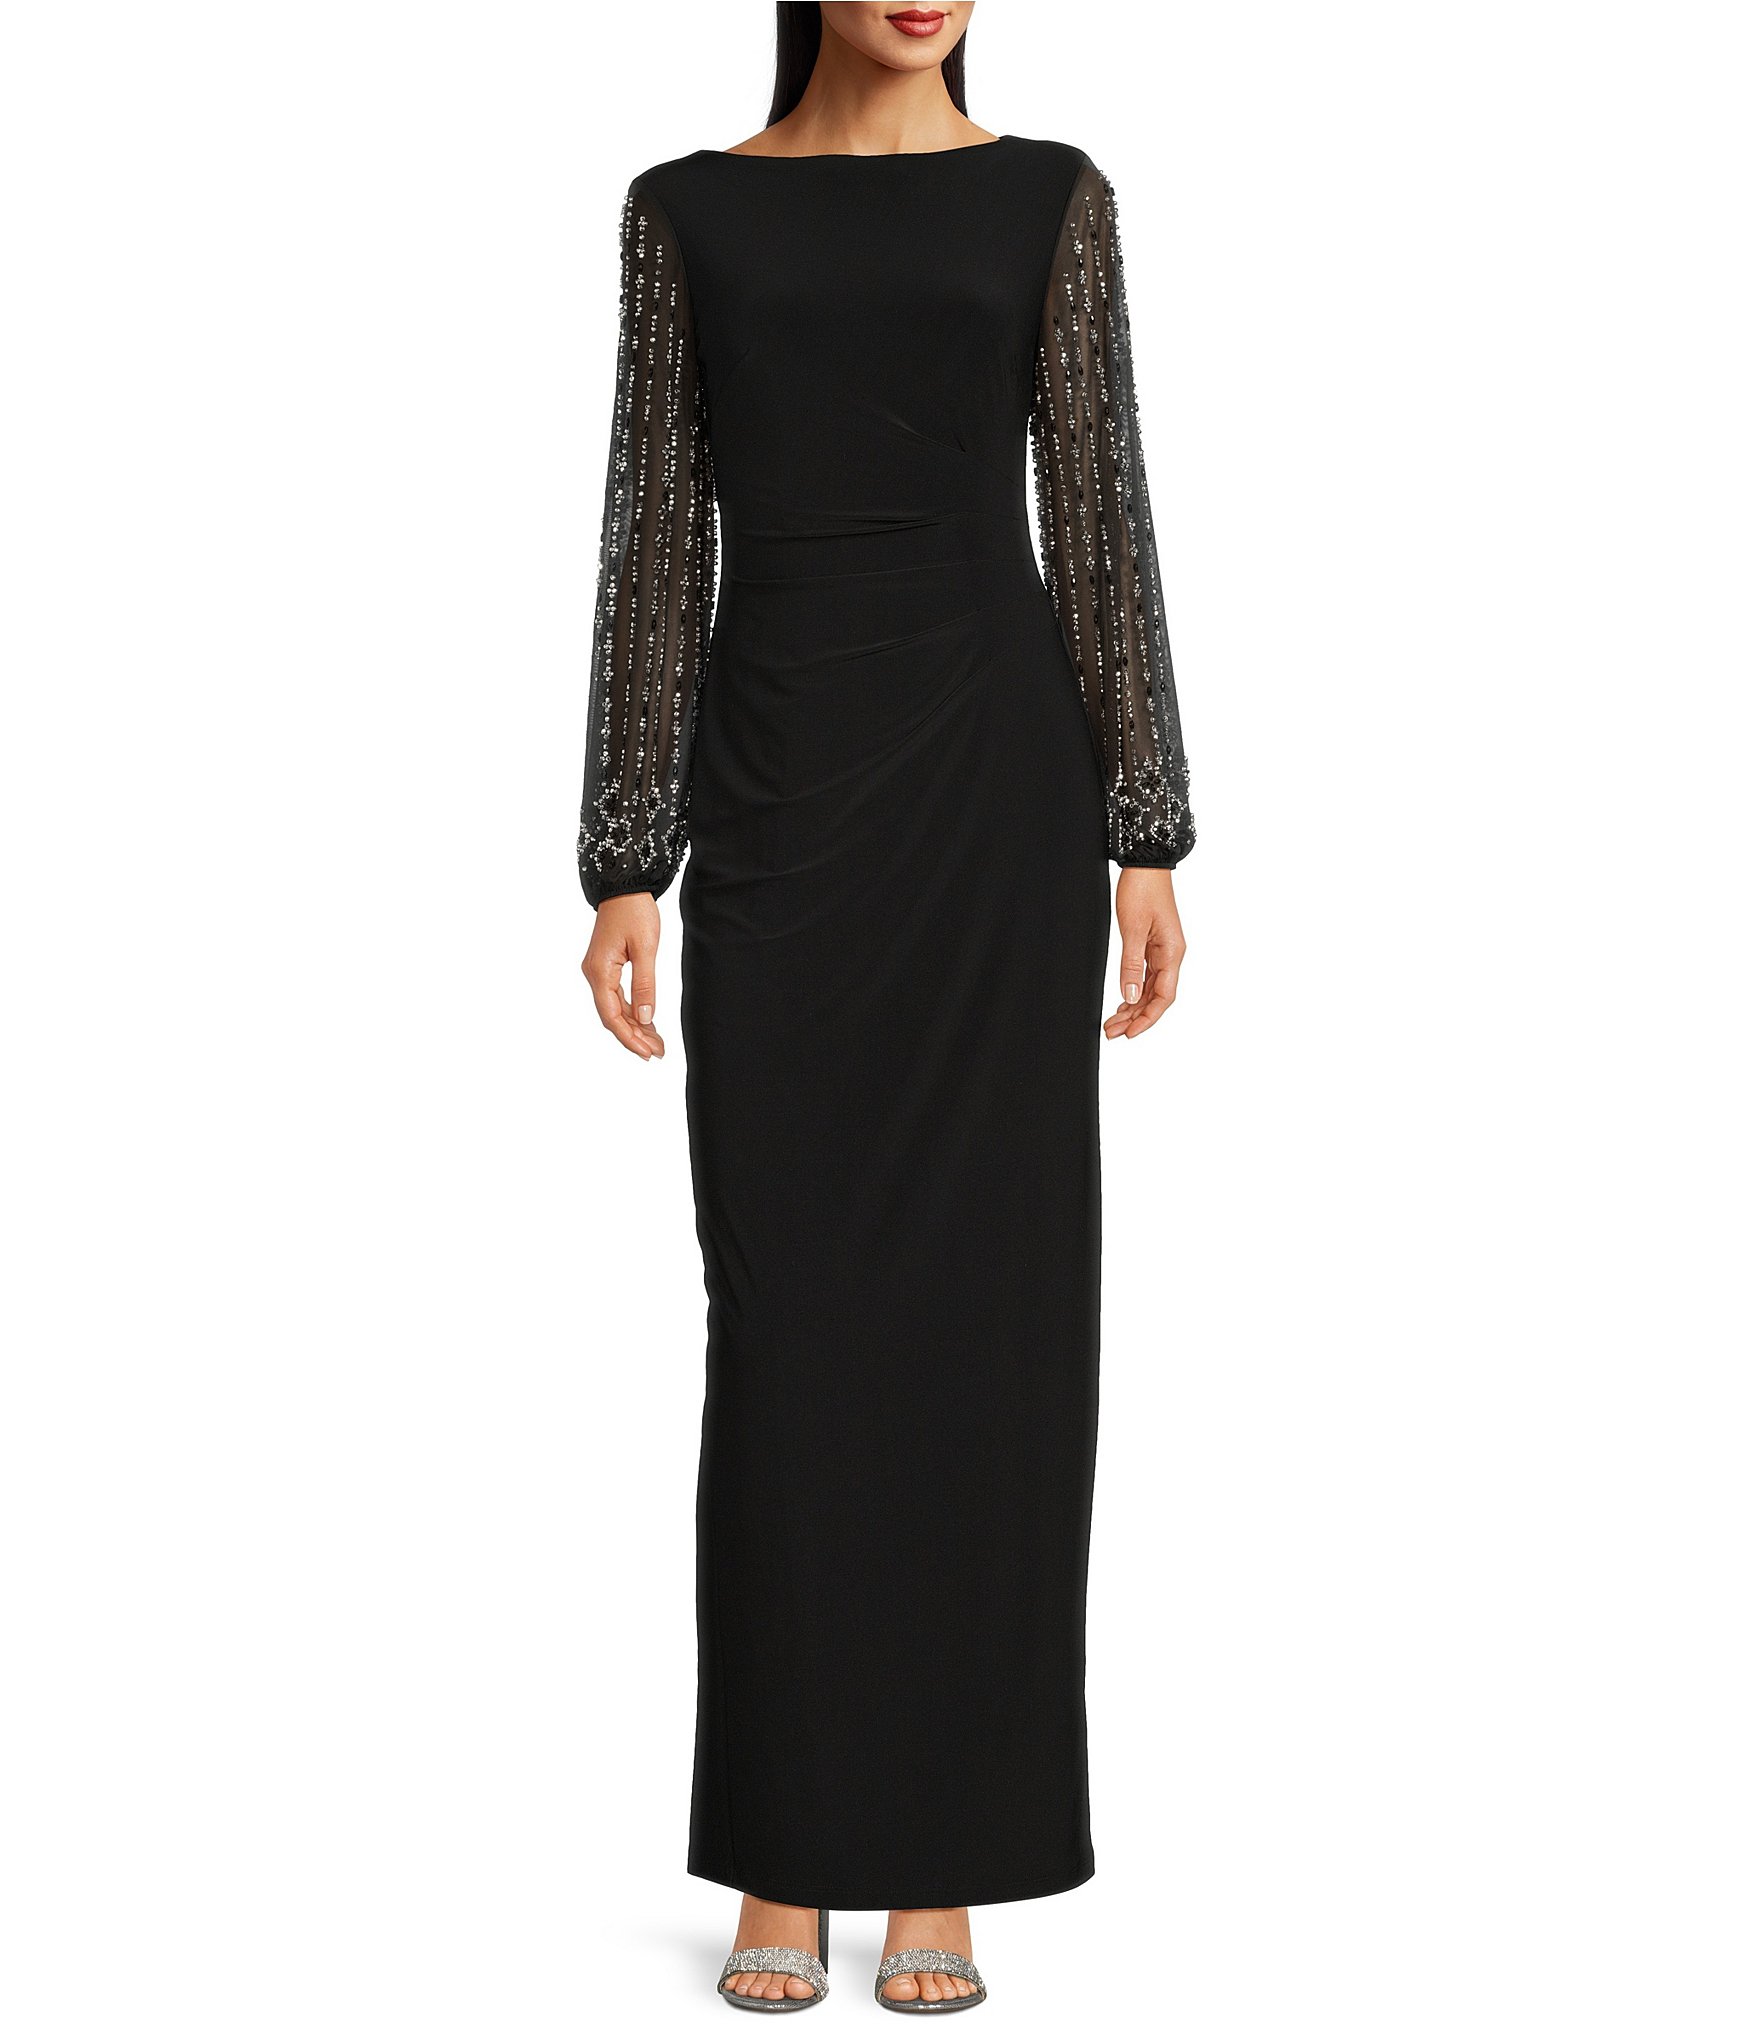 Black Mother of the Bride Dresses & Gowns | Dillard's